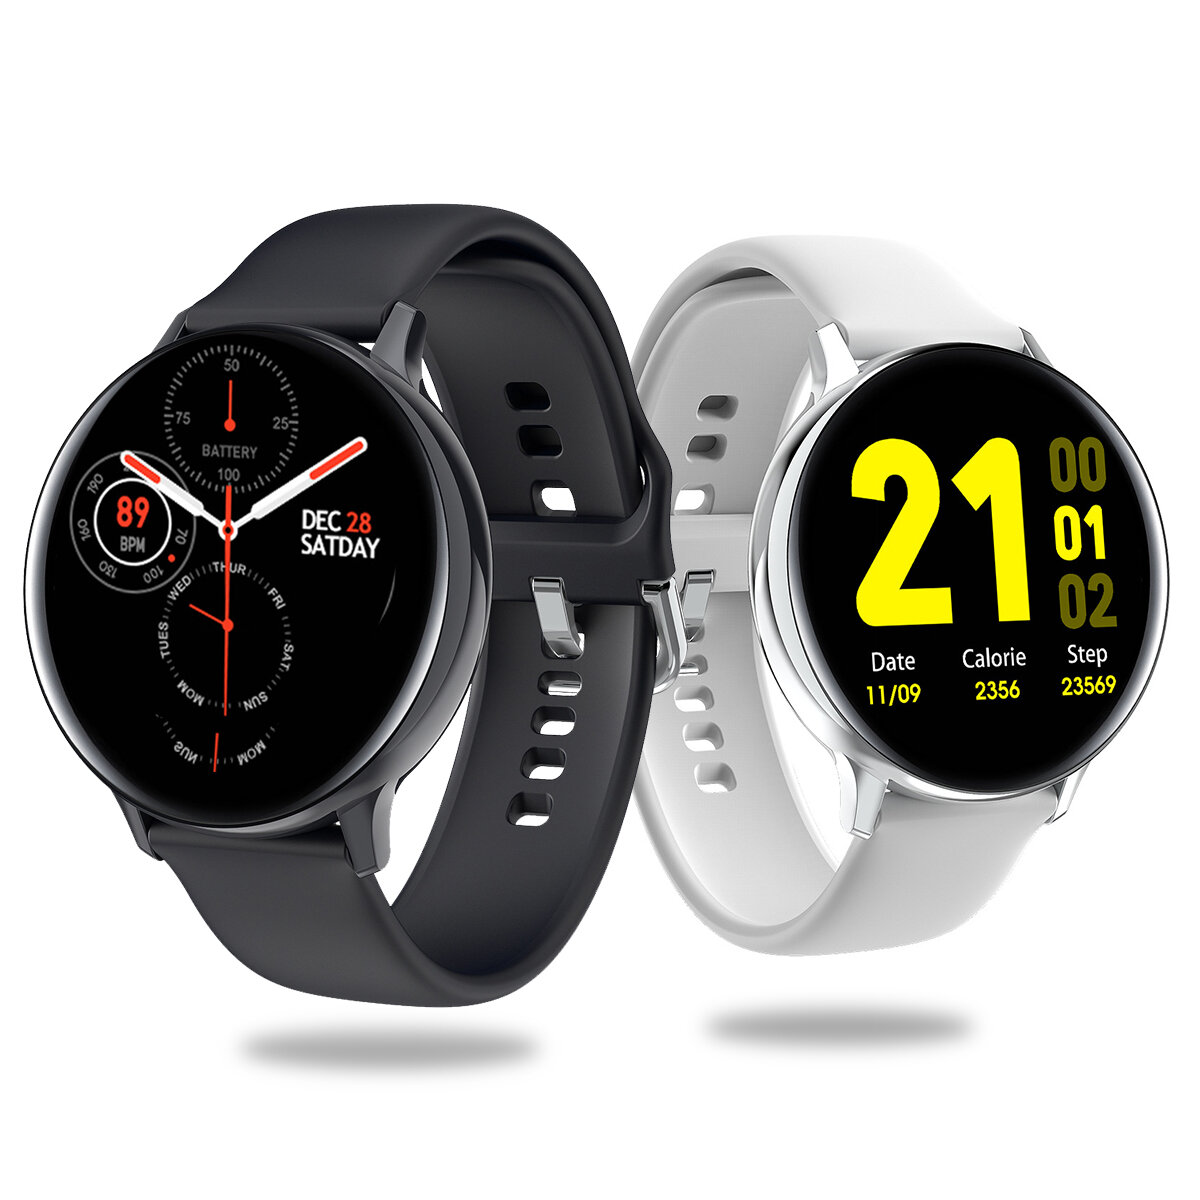 

Bakeey S20S 1.4 inch Full-touch Screen 24h Heart Rate Blood Pressure Oxygen Monitor Music Control IP68 Waterproof Smart